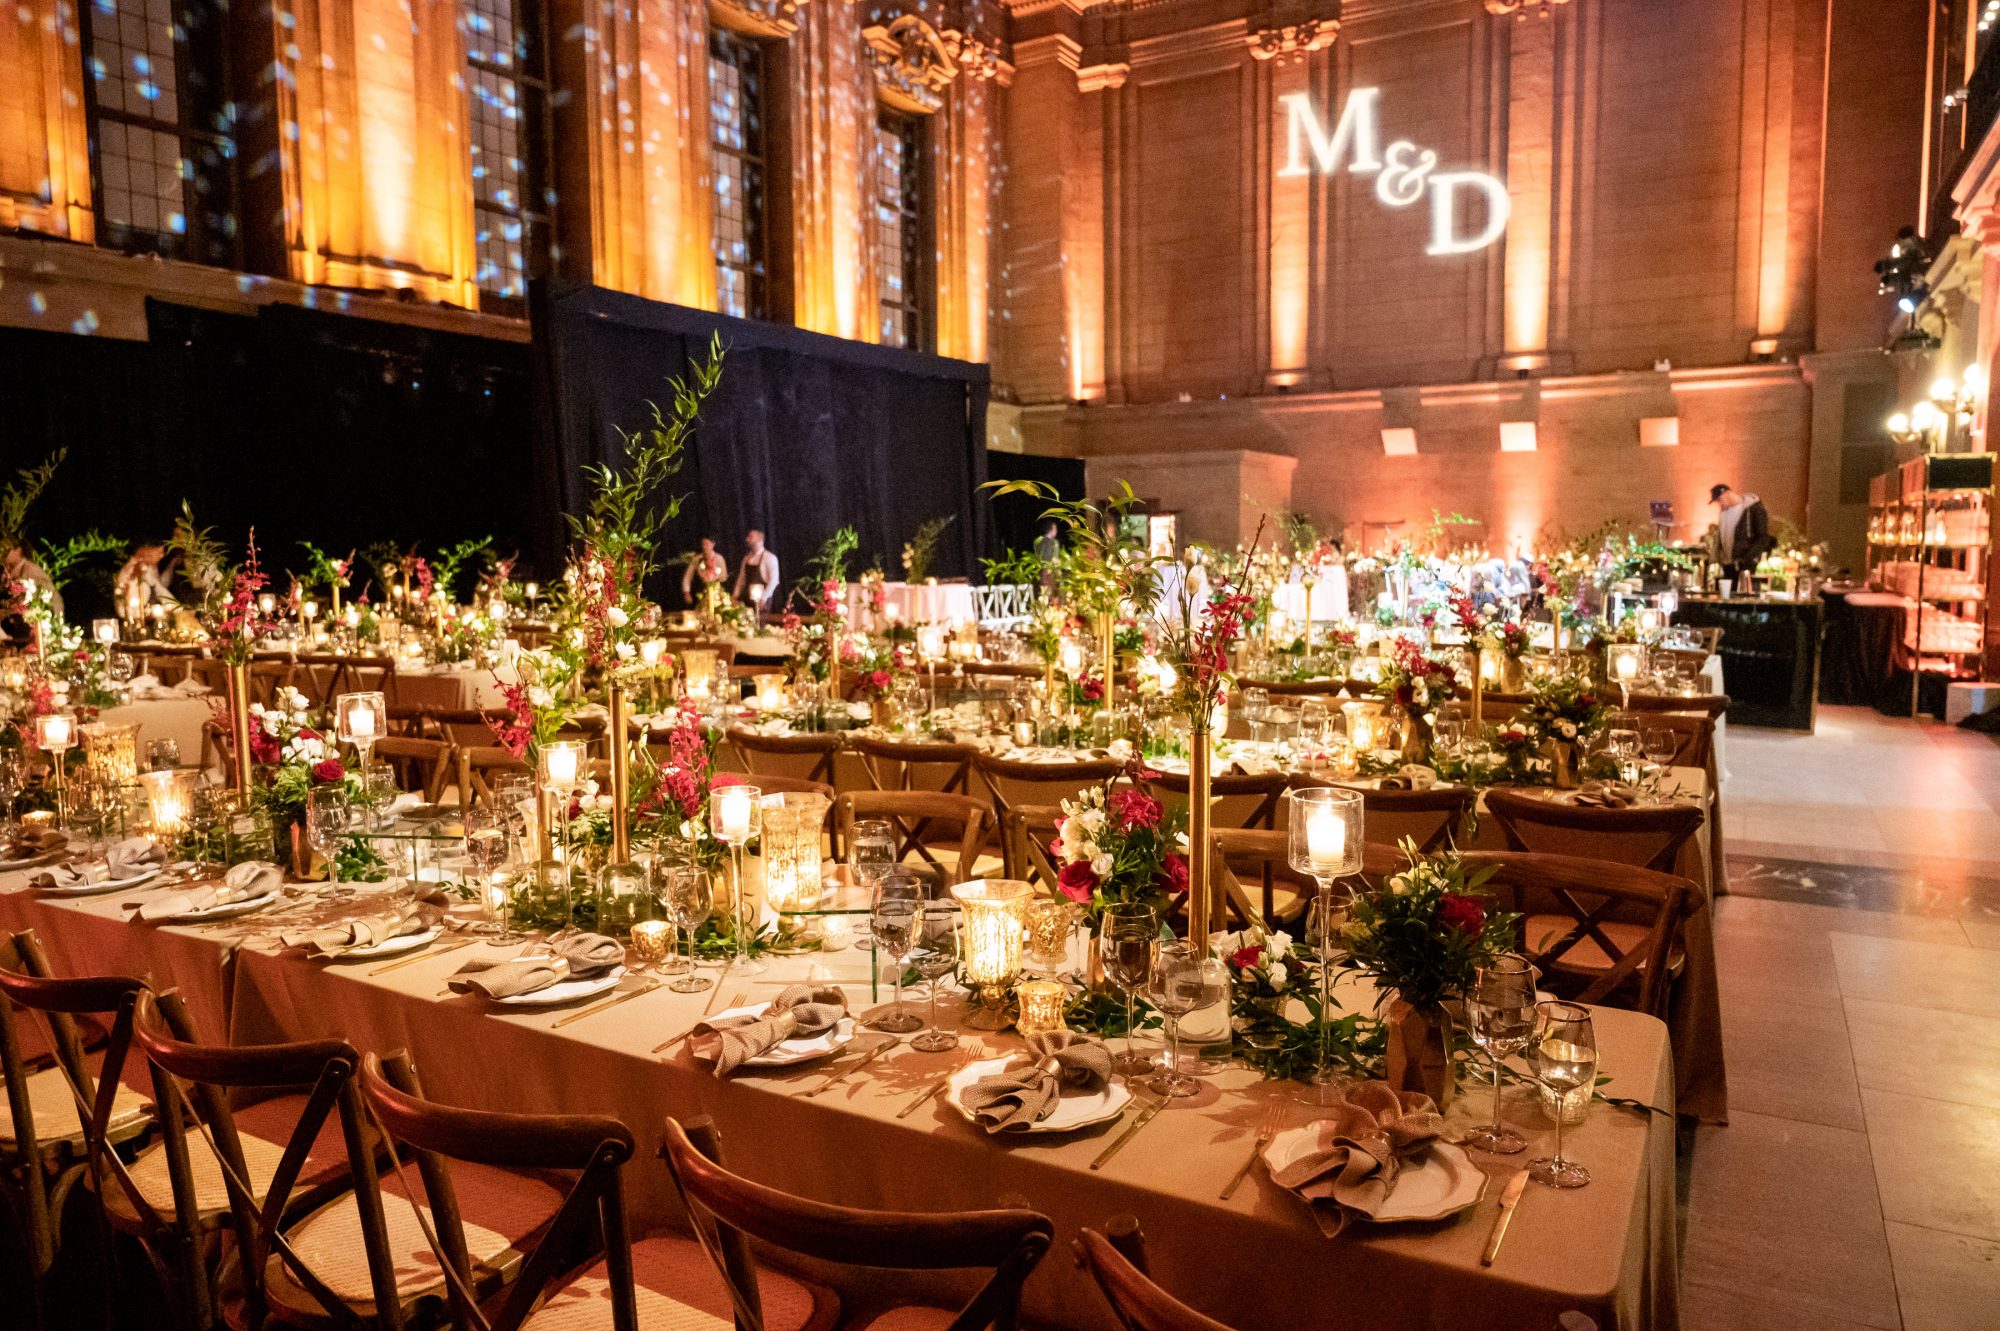 Contemporary wedding decor in gold with wooden details at Le St-James Theater